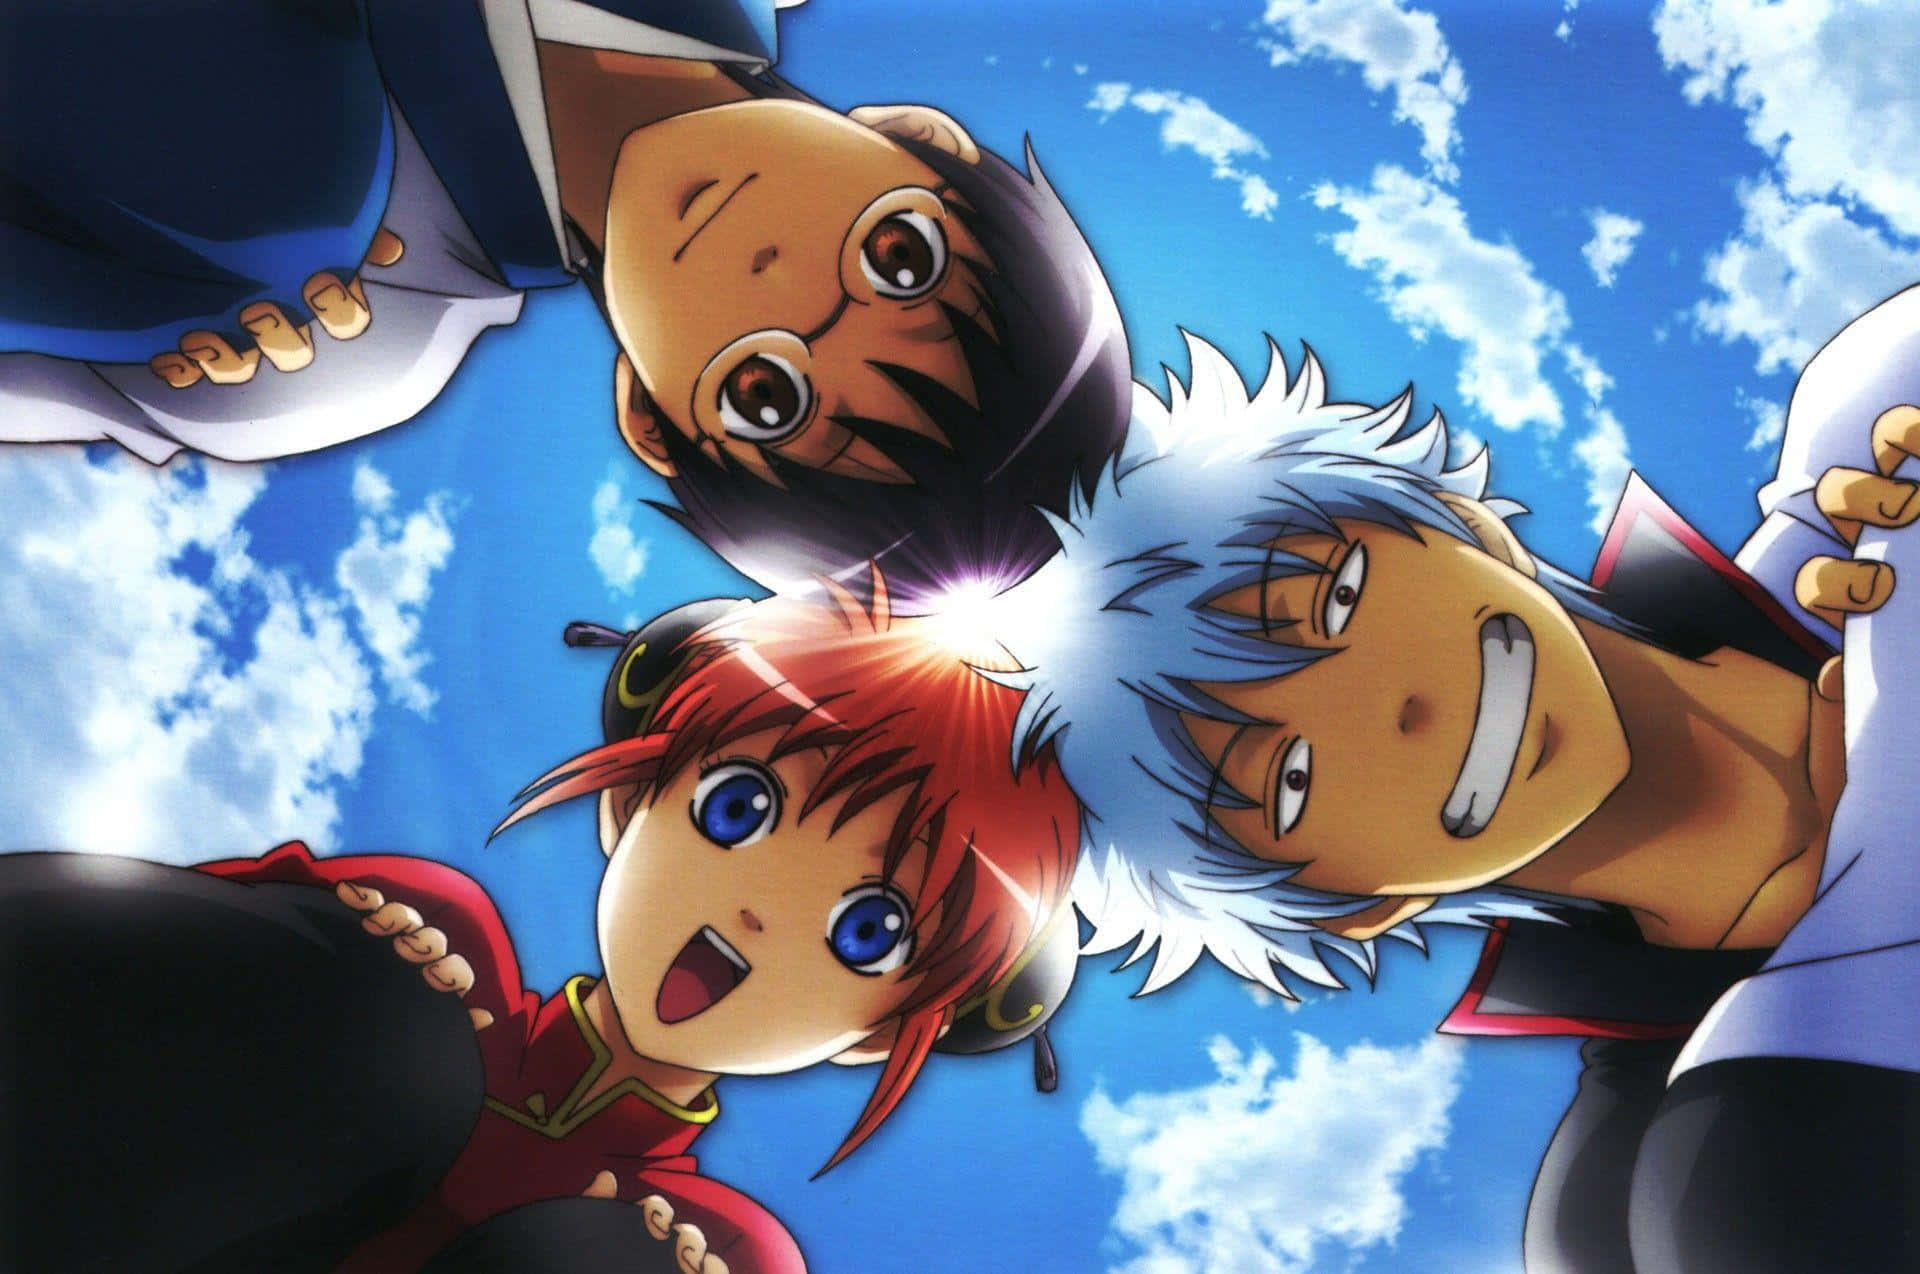 Join Gintama on this Fun, Outrageous and Exciting Adventure!